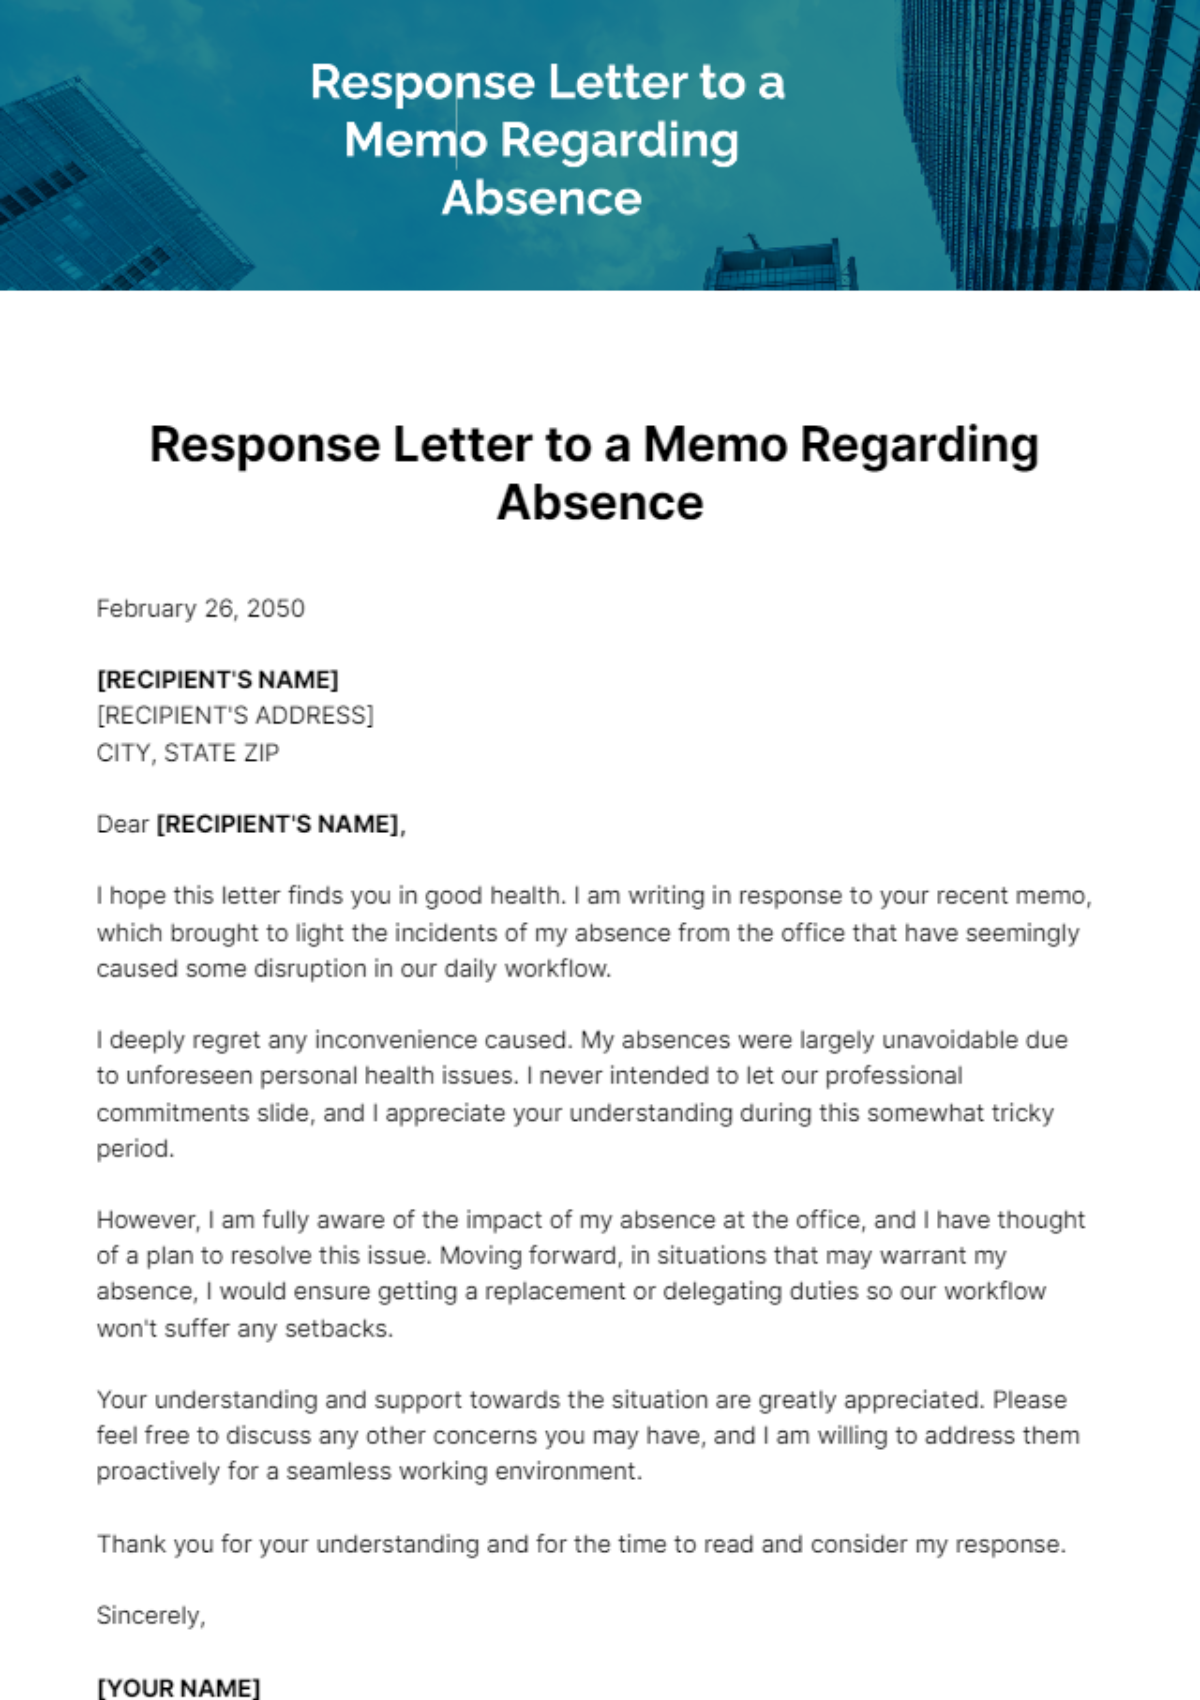 Response Letter to a Memo Regarding Absence Template